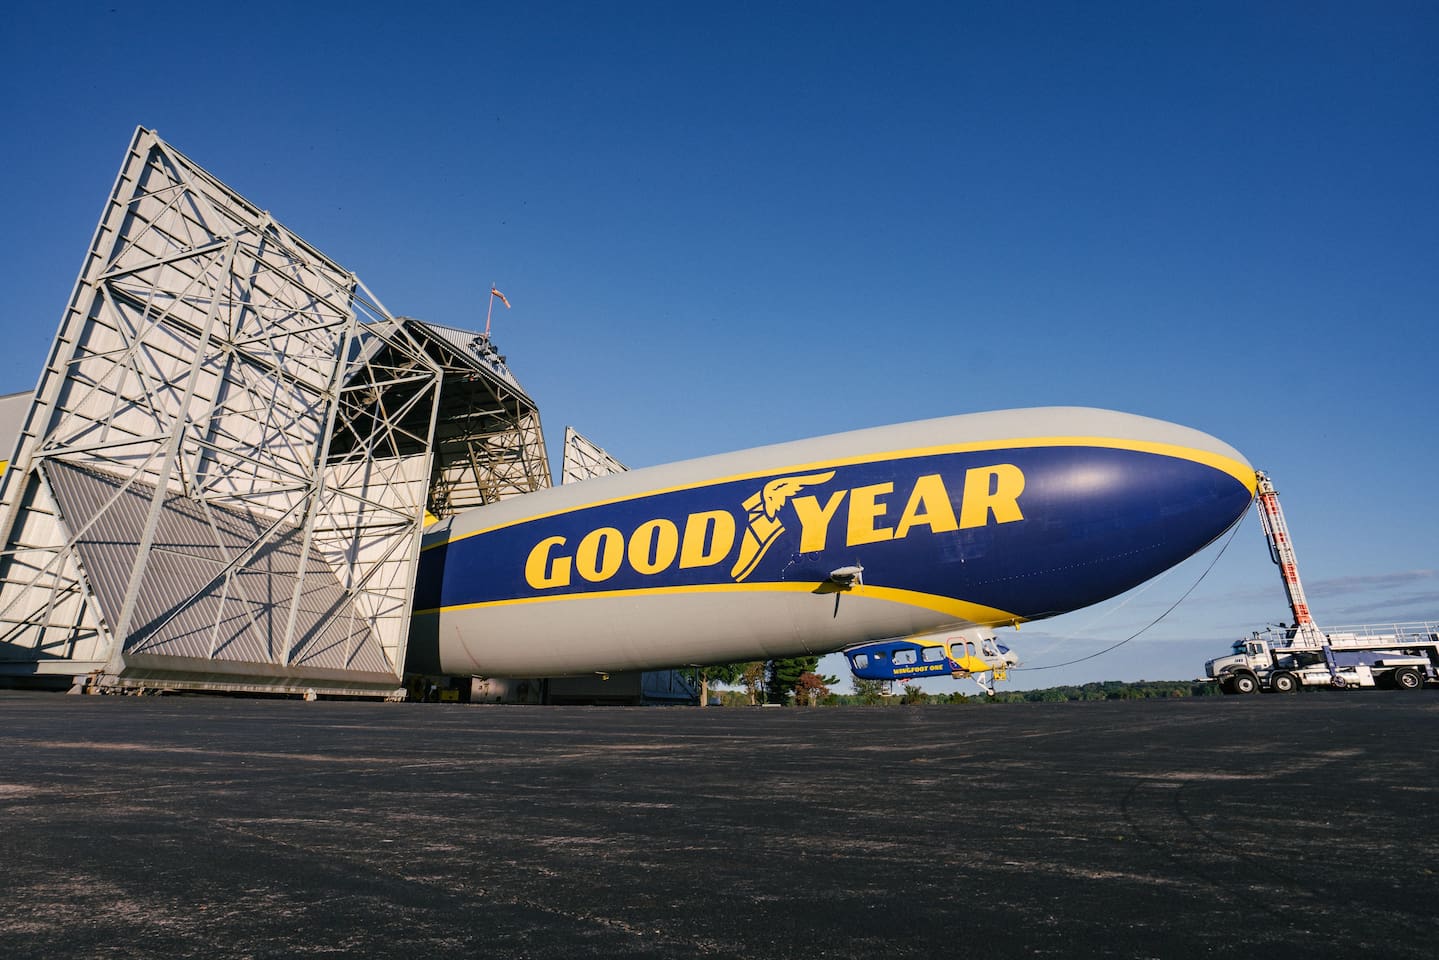 A Touchdown Stay in the Goodyear Blimp